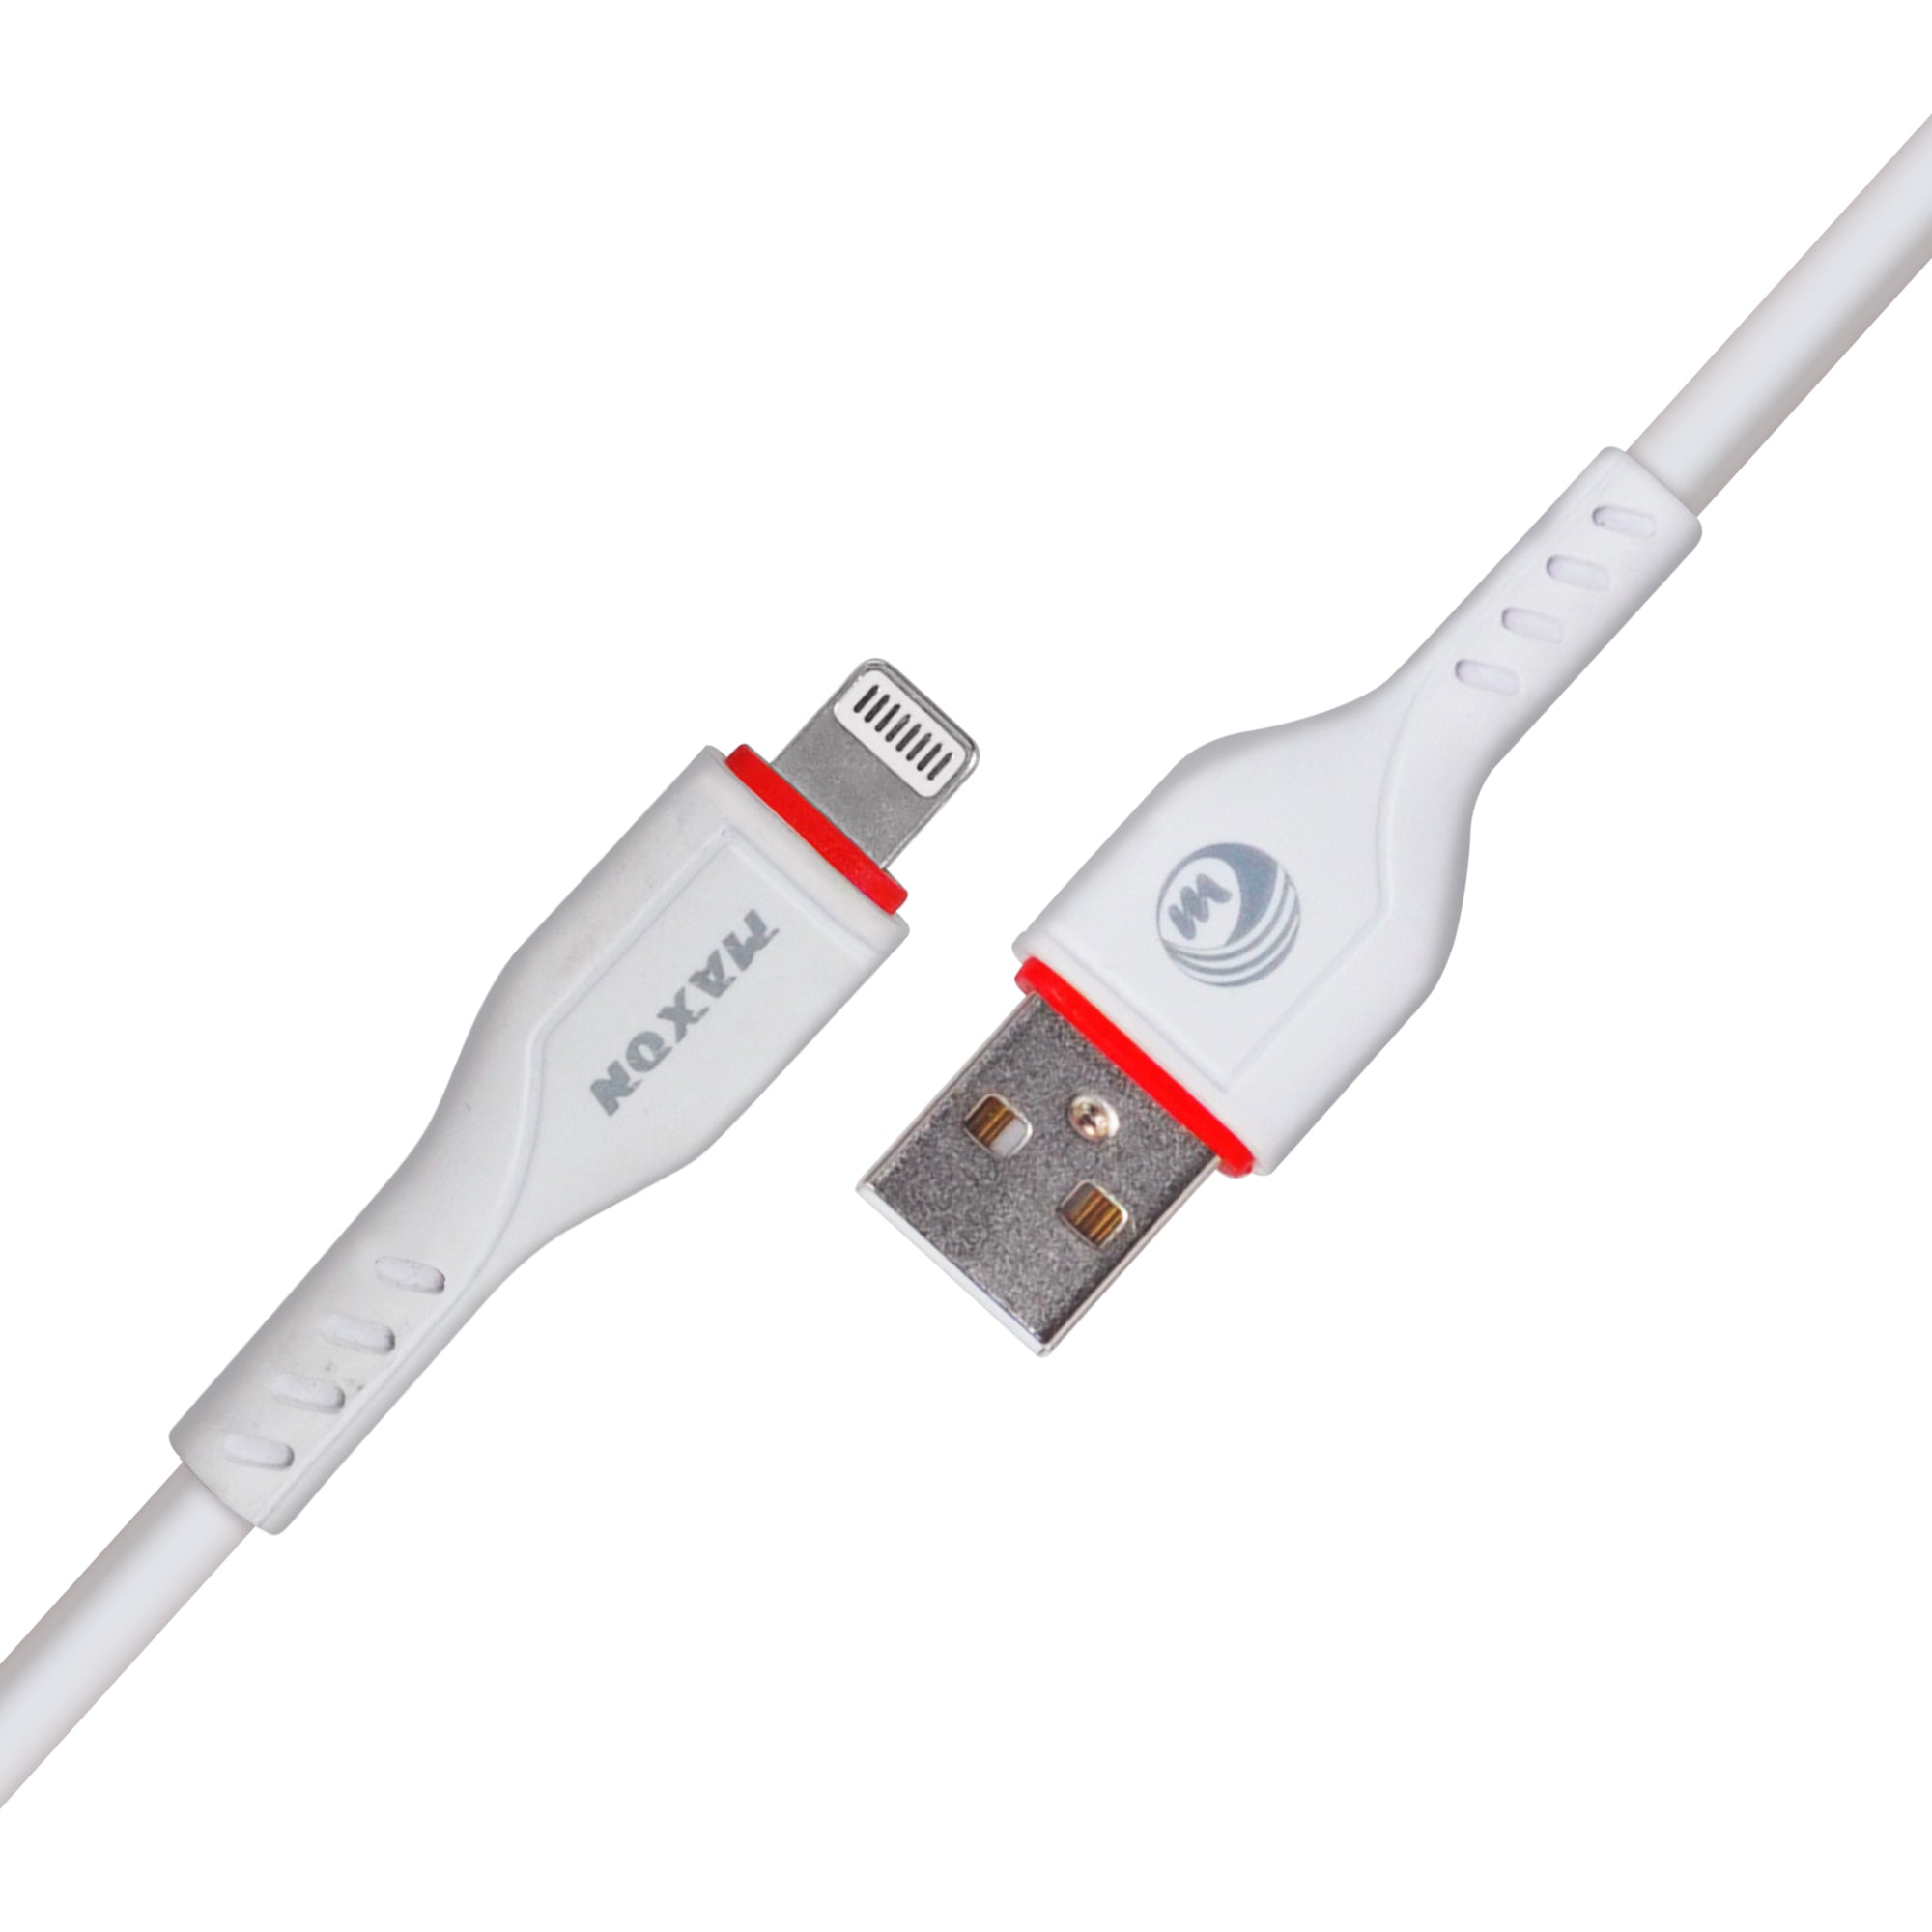 MAXON R-6 IPHONE DATA CABLE